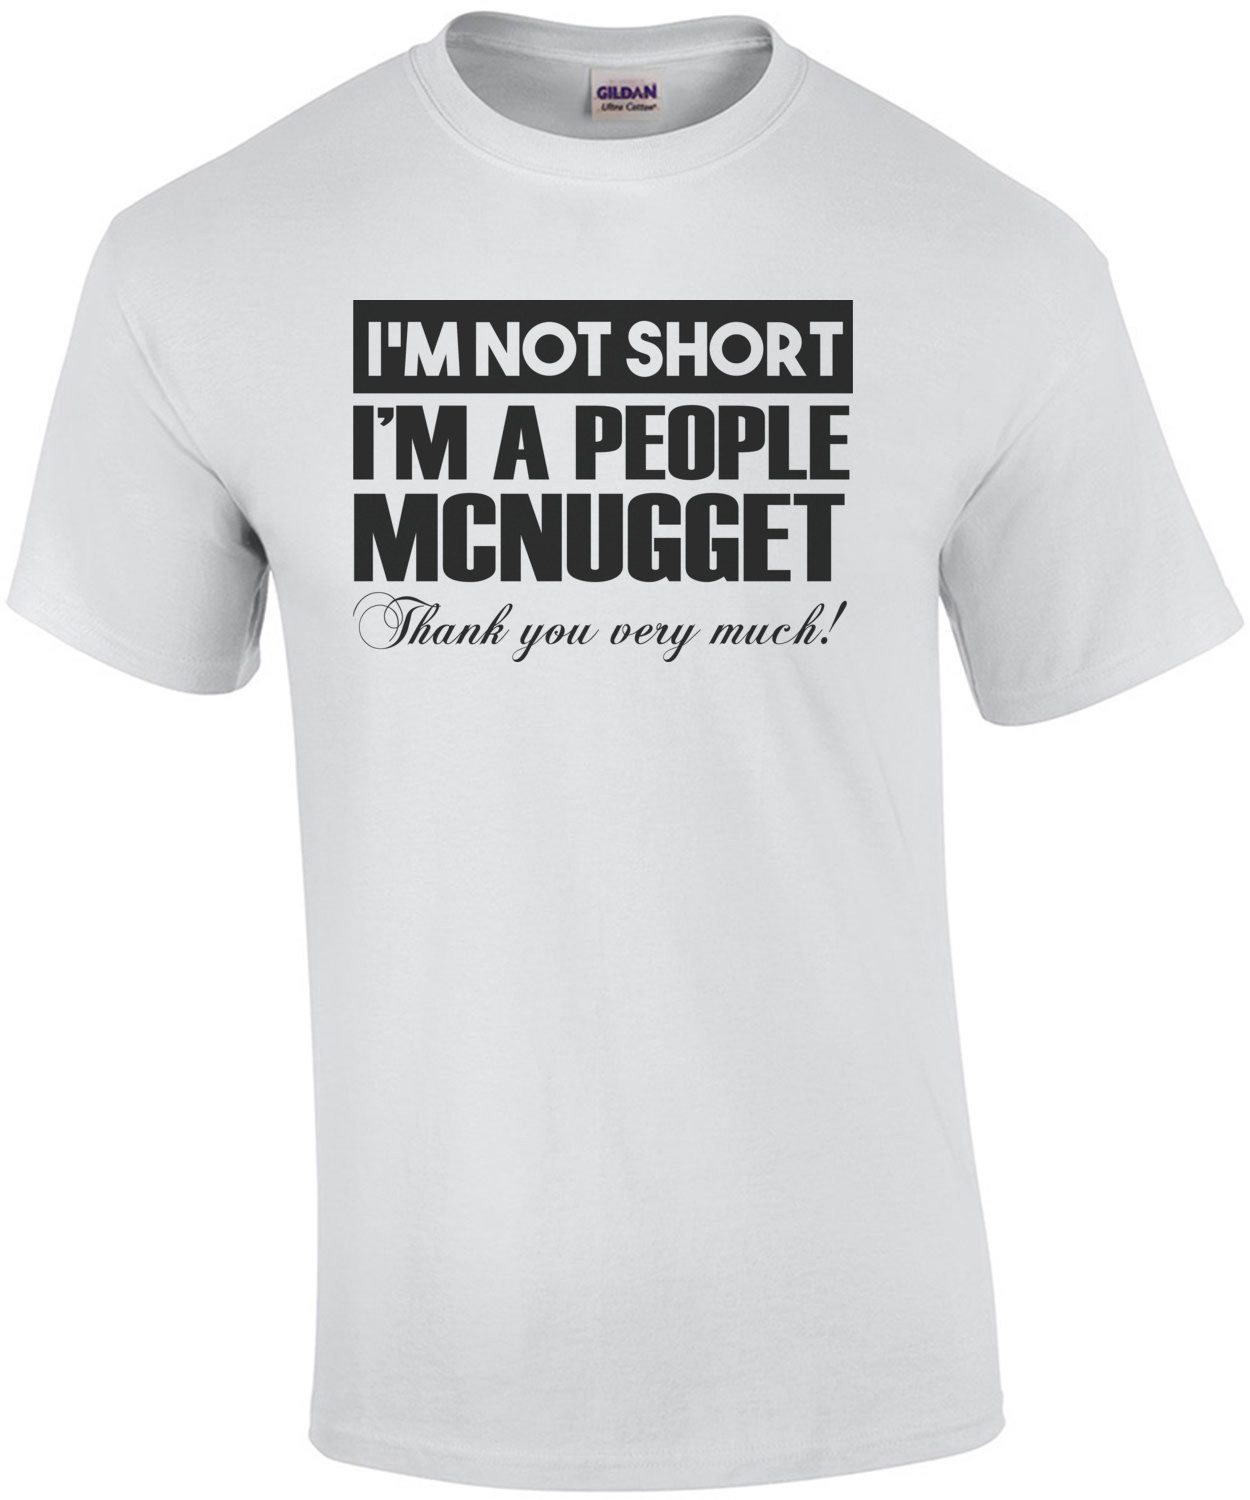 I'm not short I'm a people mcnugget